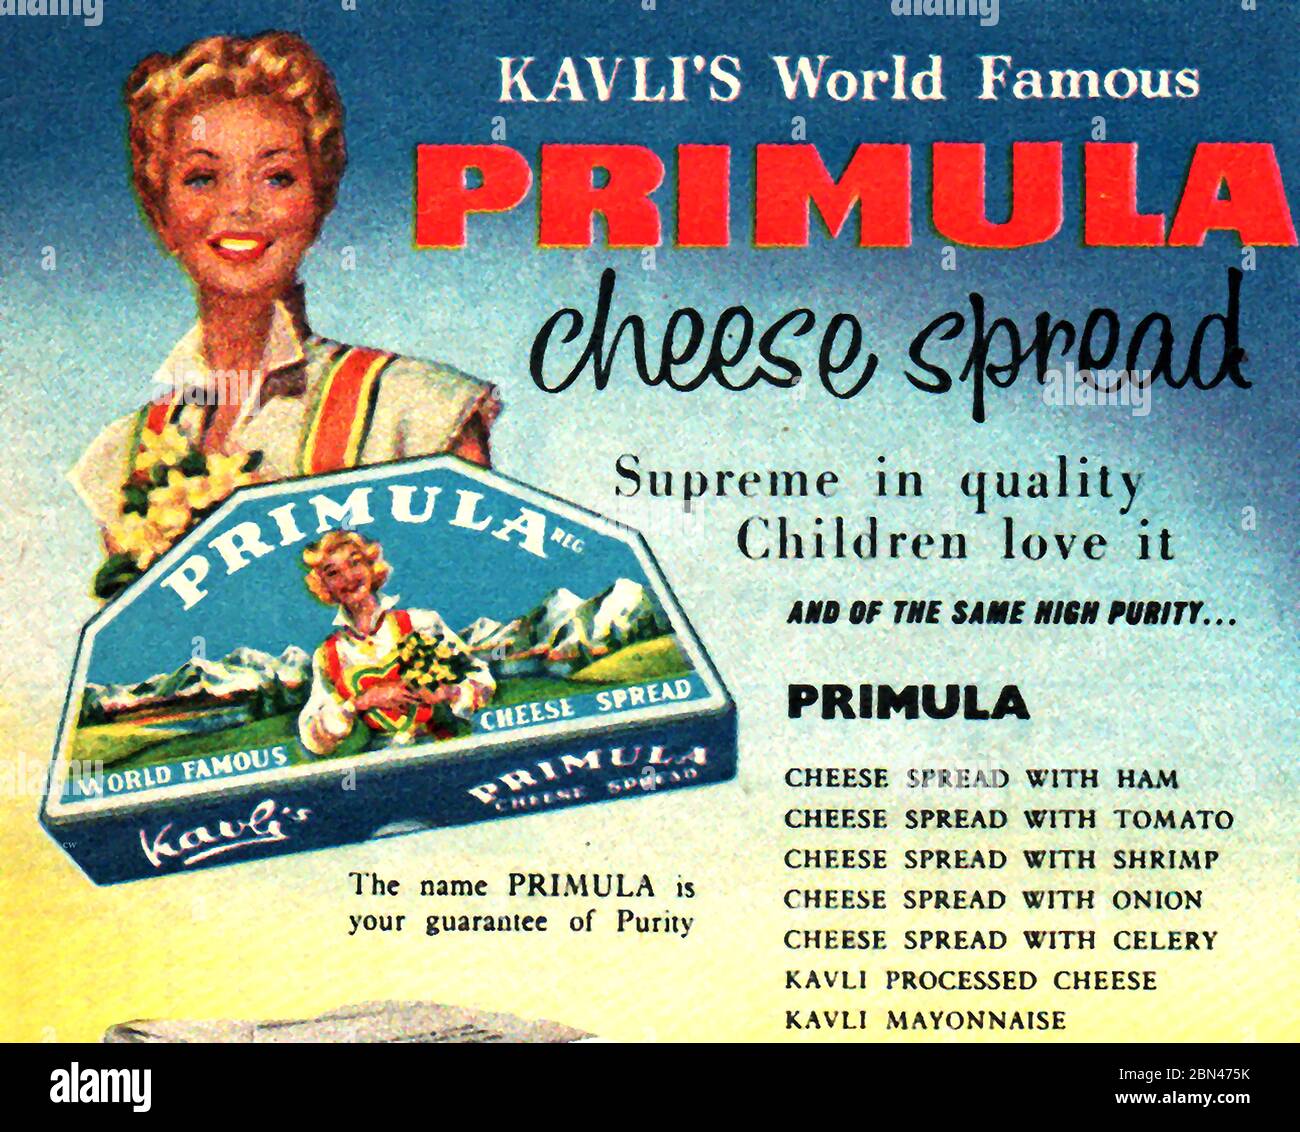 Dairy Industry in Britain - A 1950's UK advertisement for Primula processed Cheese Spread Stock Photo